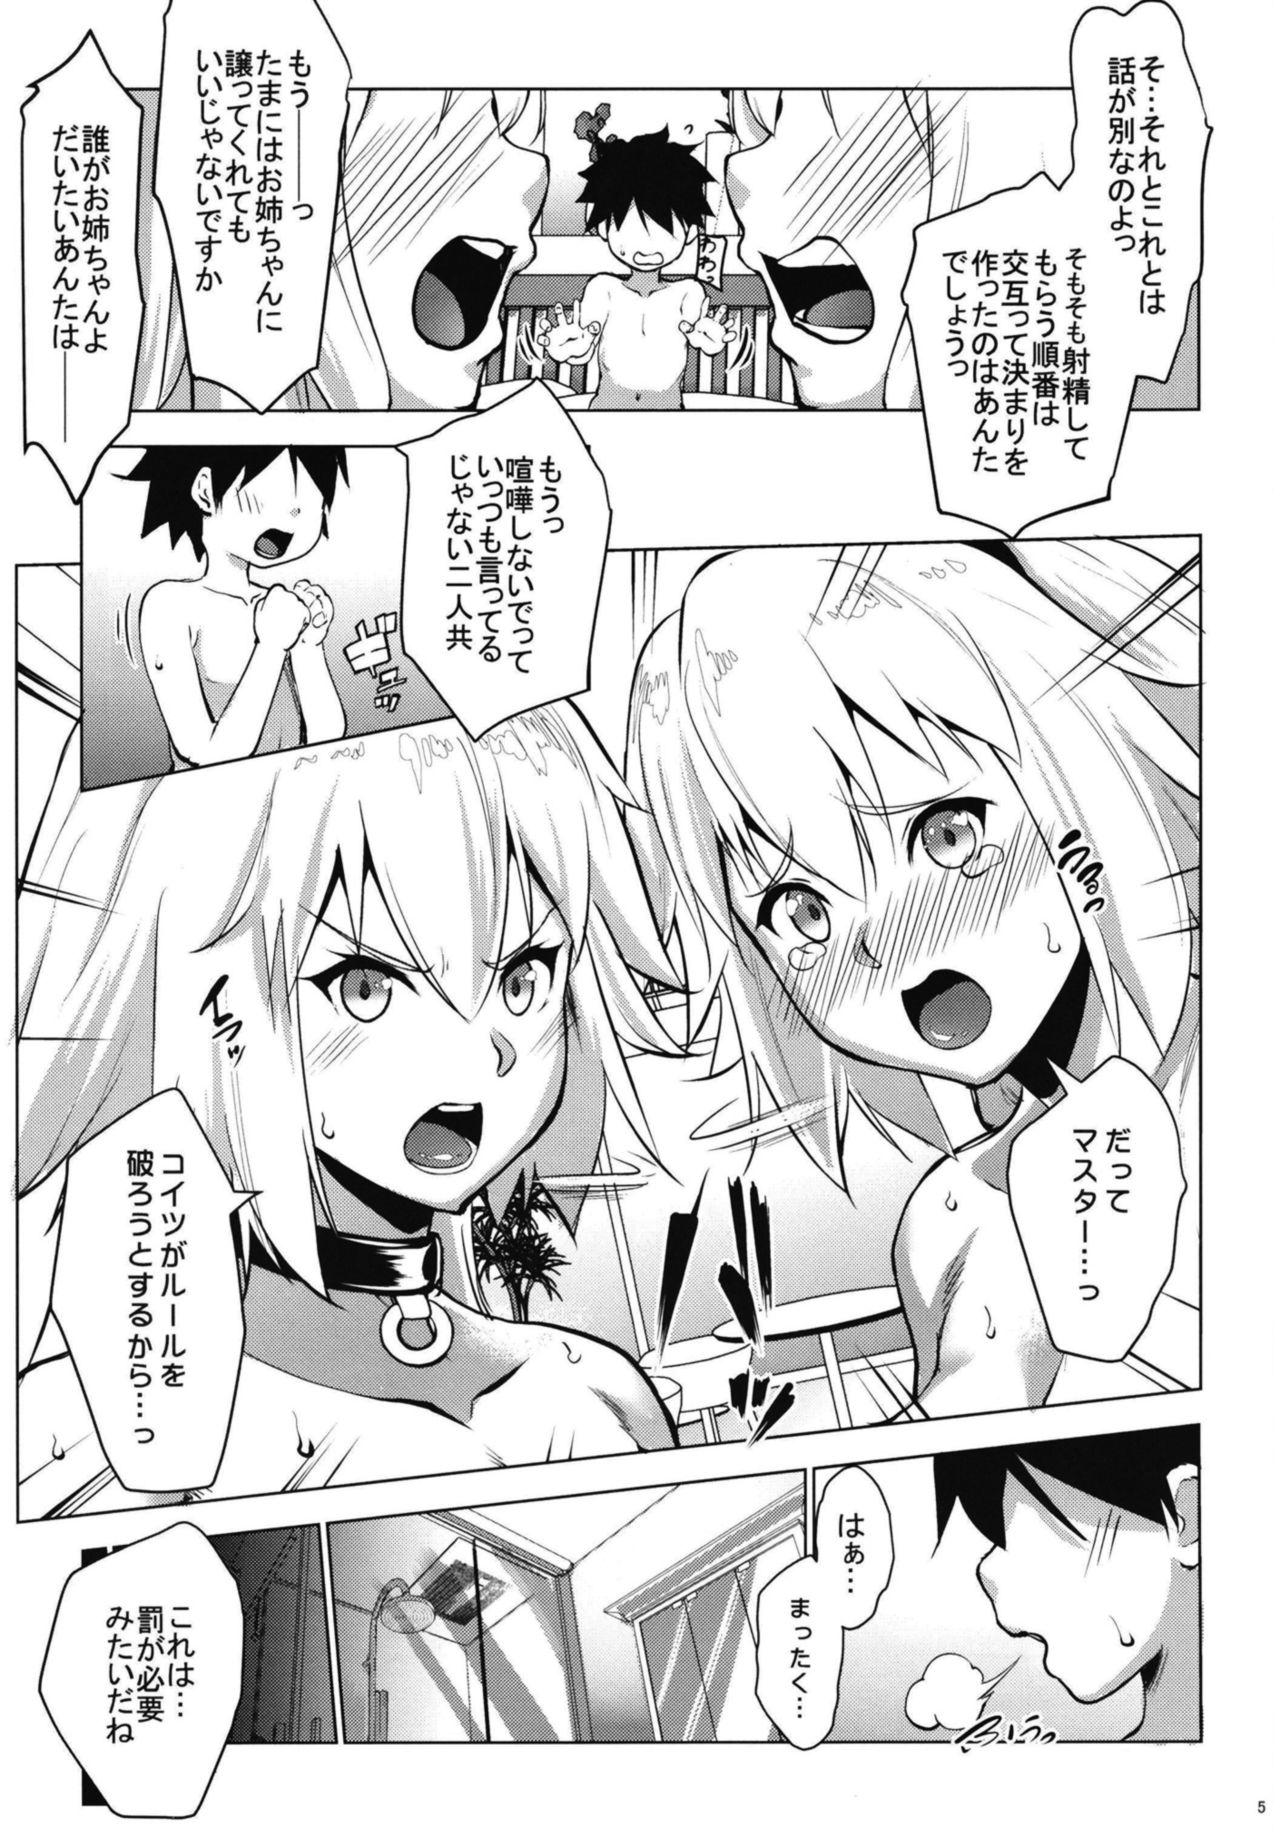 Face Sitting Obedient Servant Jeanne x Jeanne - Fate grand order Girlnextdoor - Page 5